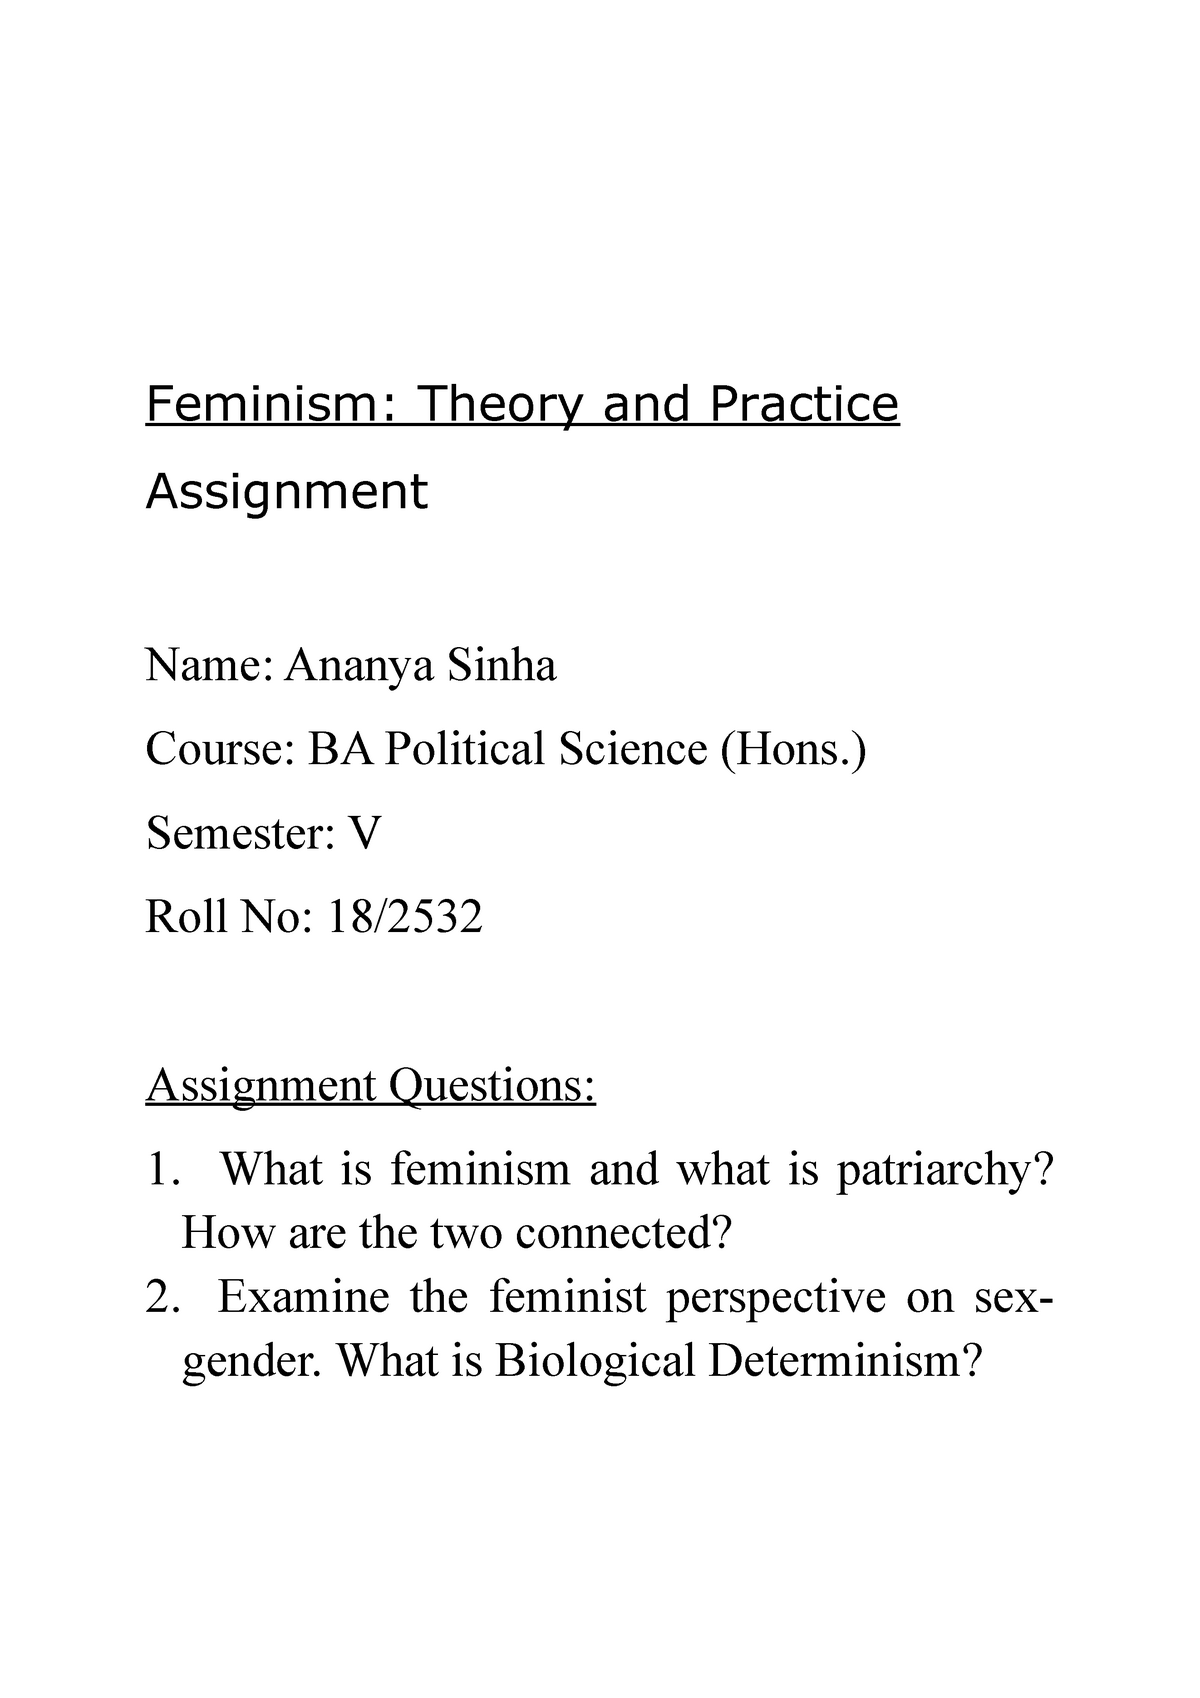 free research paper on feminism